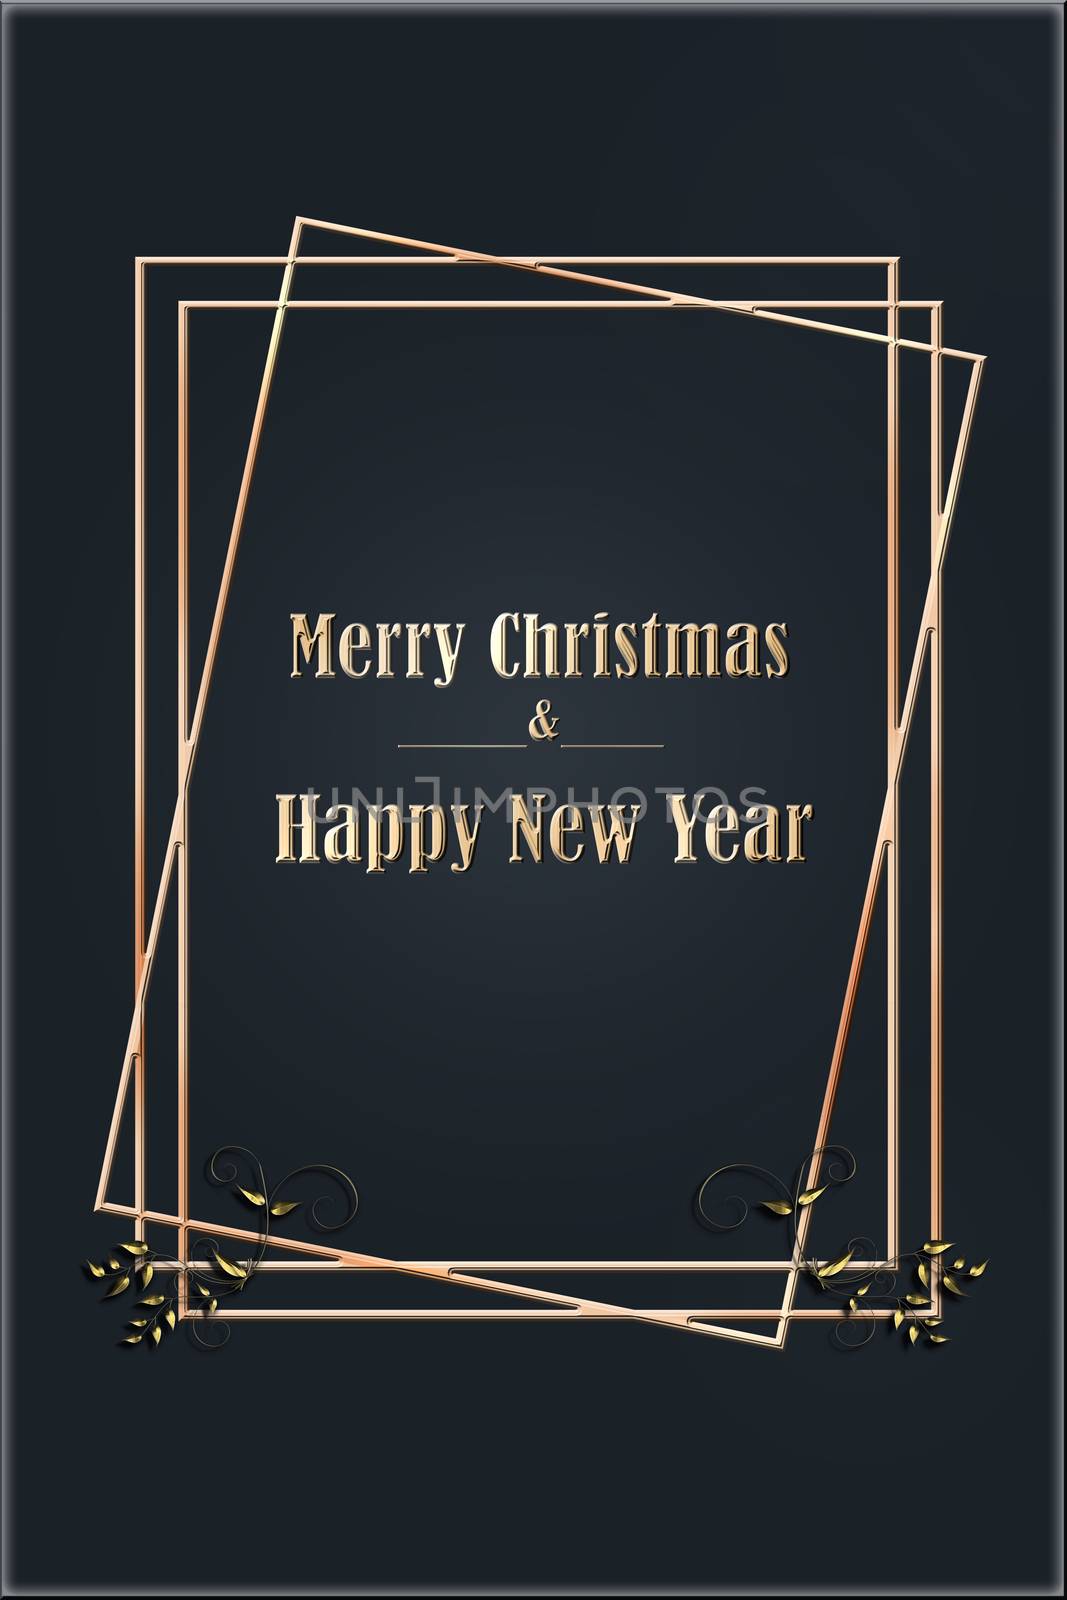 Luxury Christmas card in gold and black colors with frames. Text Merry Christmas and Happy New Year. Illustration, banner, mock up. Black Friday concept